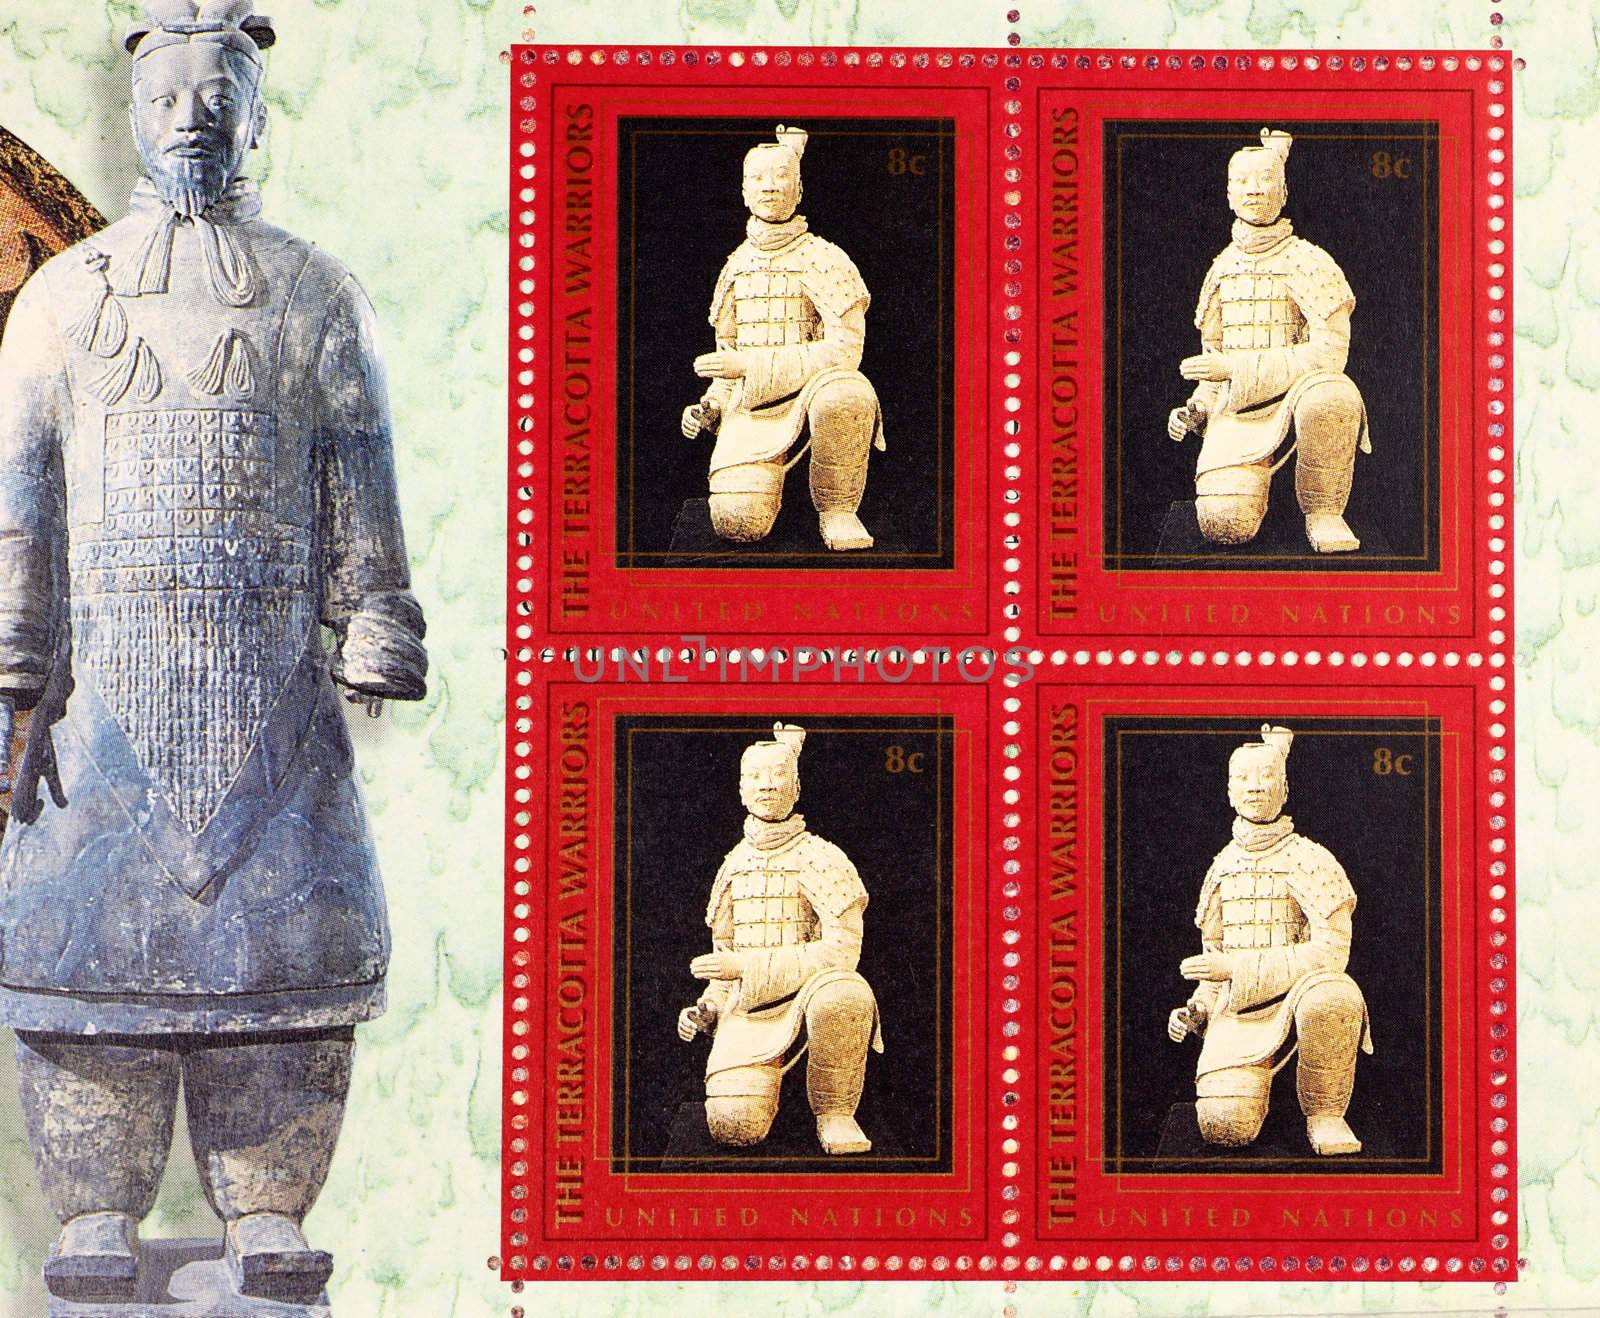 The commemorative stamps of terracotta warriors